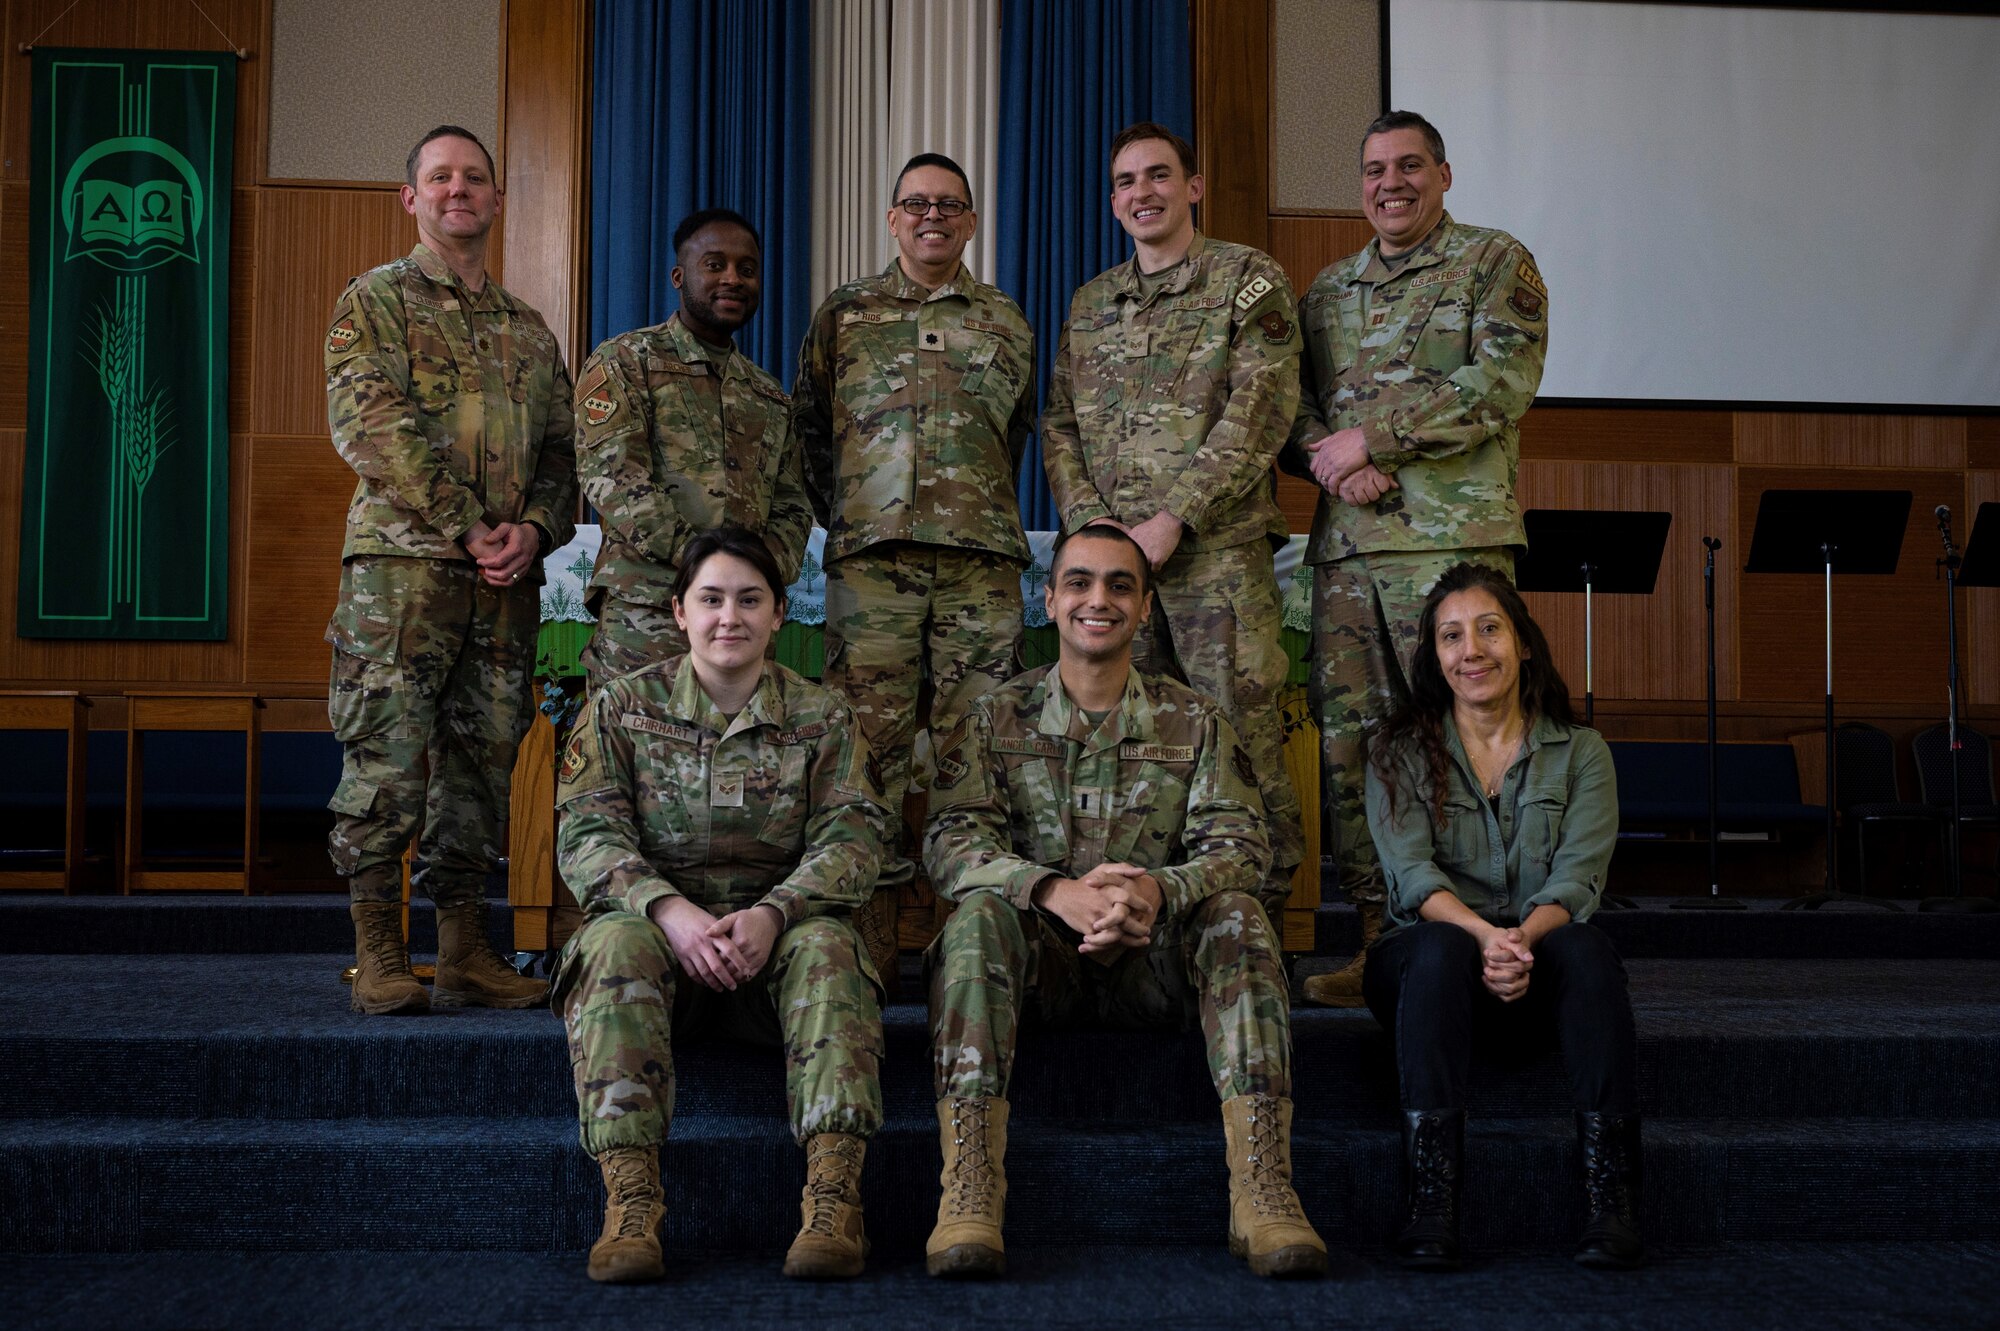 The 7th Bomb Wing Chapel Team poses for a photo in the chapel sanctuary at Dyess Air Force Base, Texas, Feb. 13, 2023. For the first time in nearly a decade, the 7th BW Chapel Team received the honor of being named the 2022 Air Force Global Strike Command Medium Chapel Team of the Year. (U.S. Air Force photo by Senior Airman Colin Hollowell)